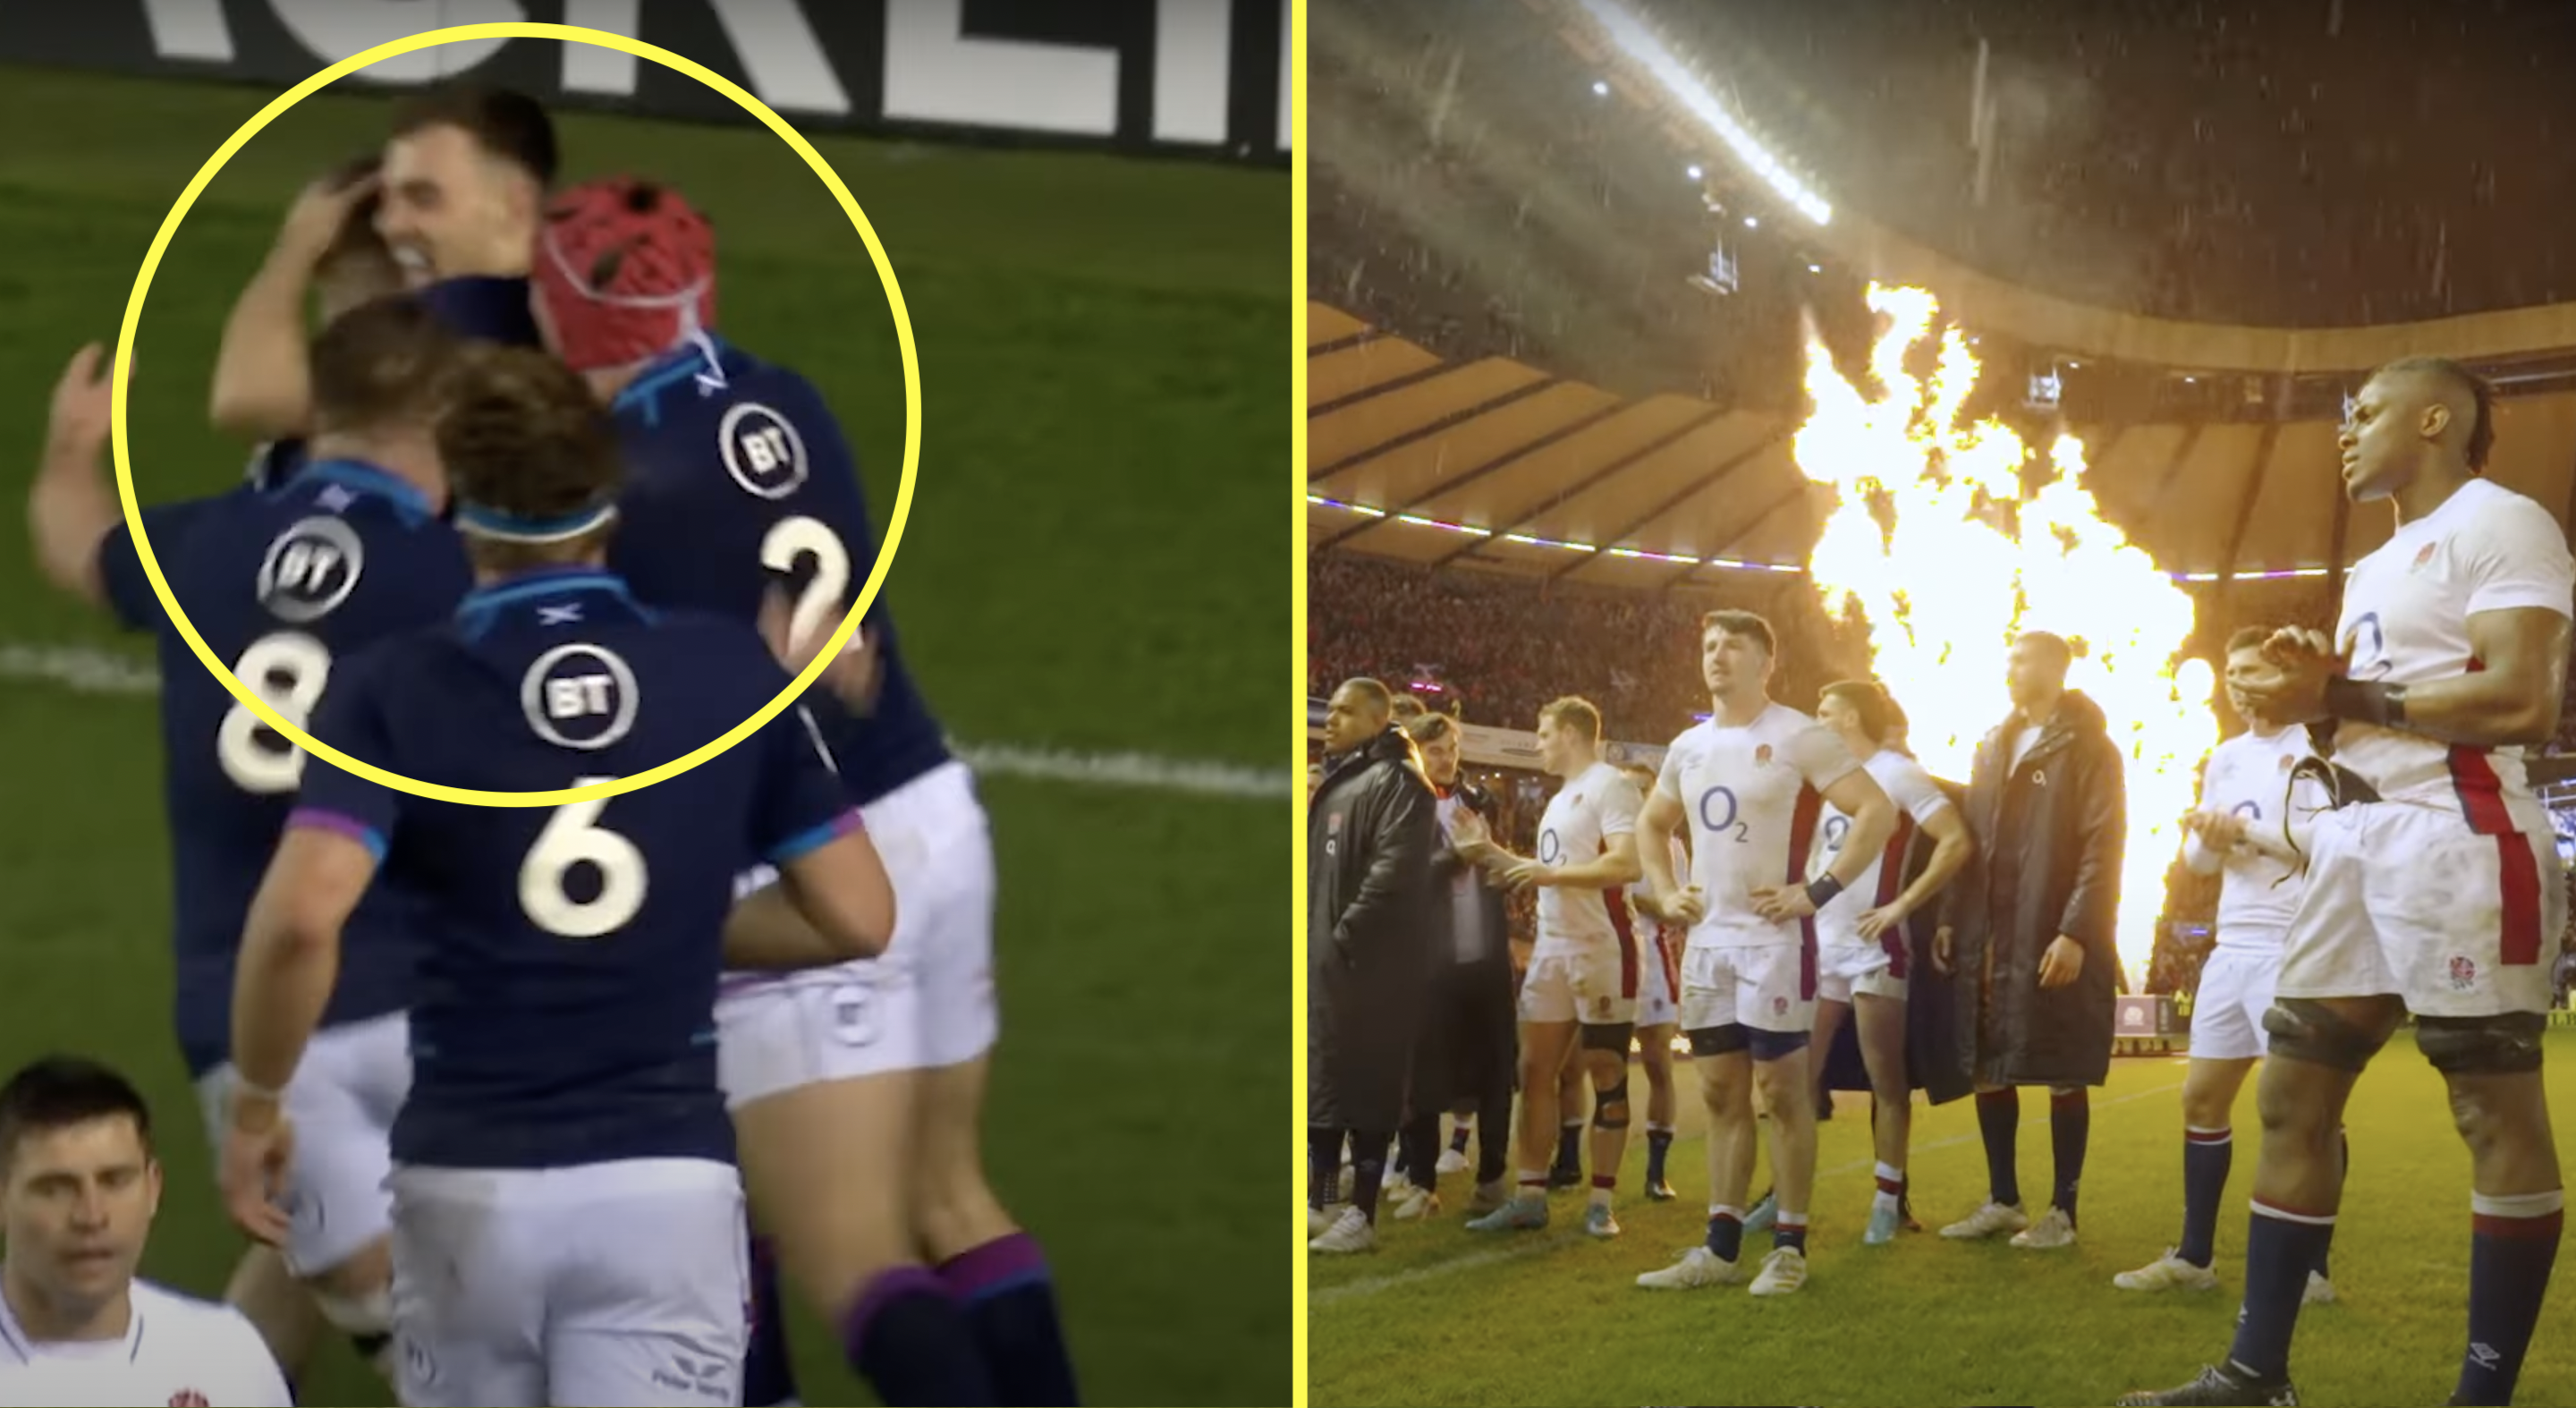 Unseen footage shows why Scotland's illegal try robbed England of victory